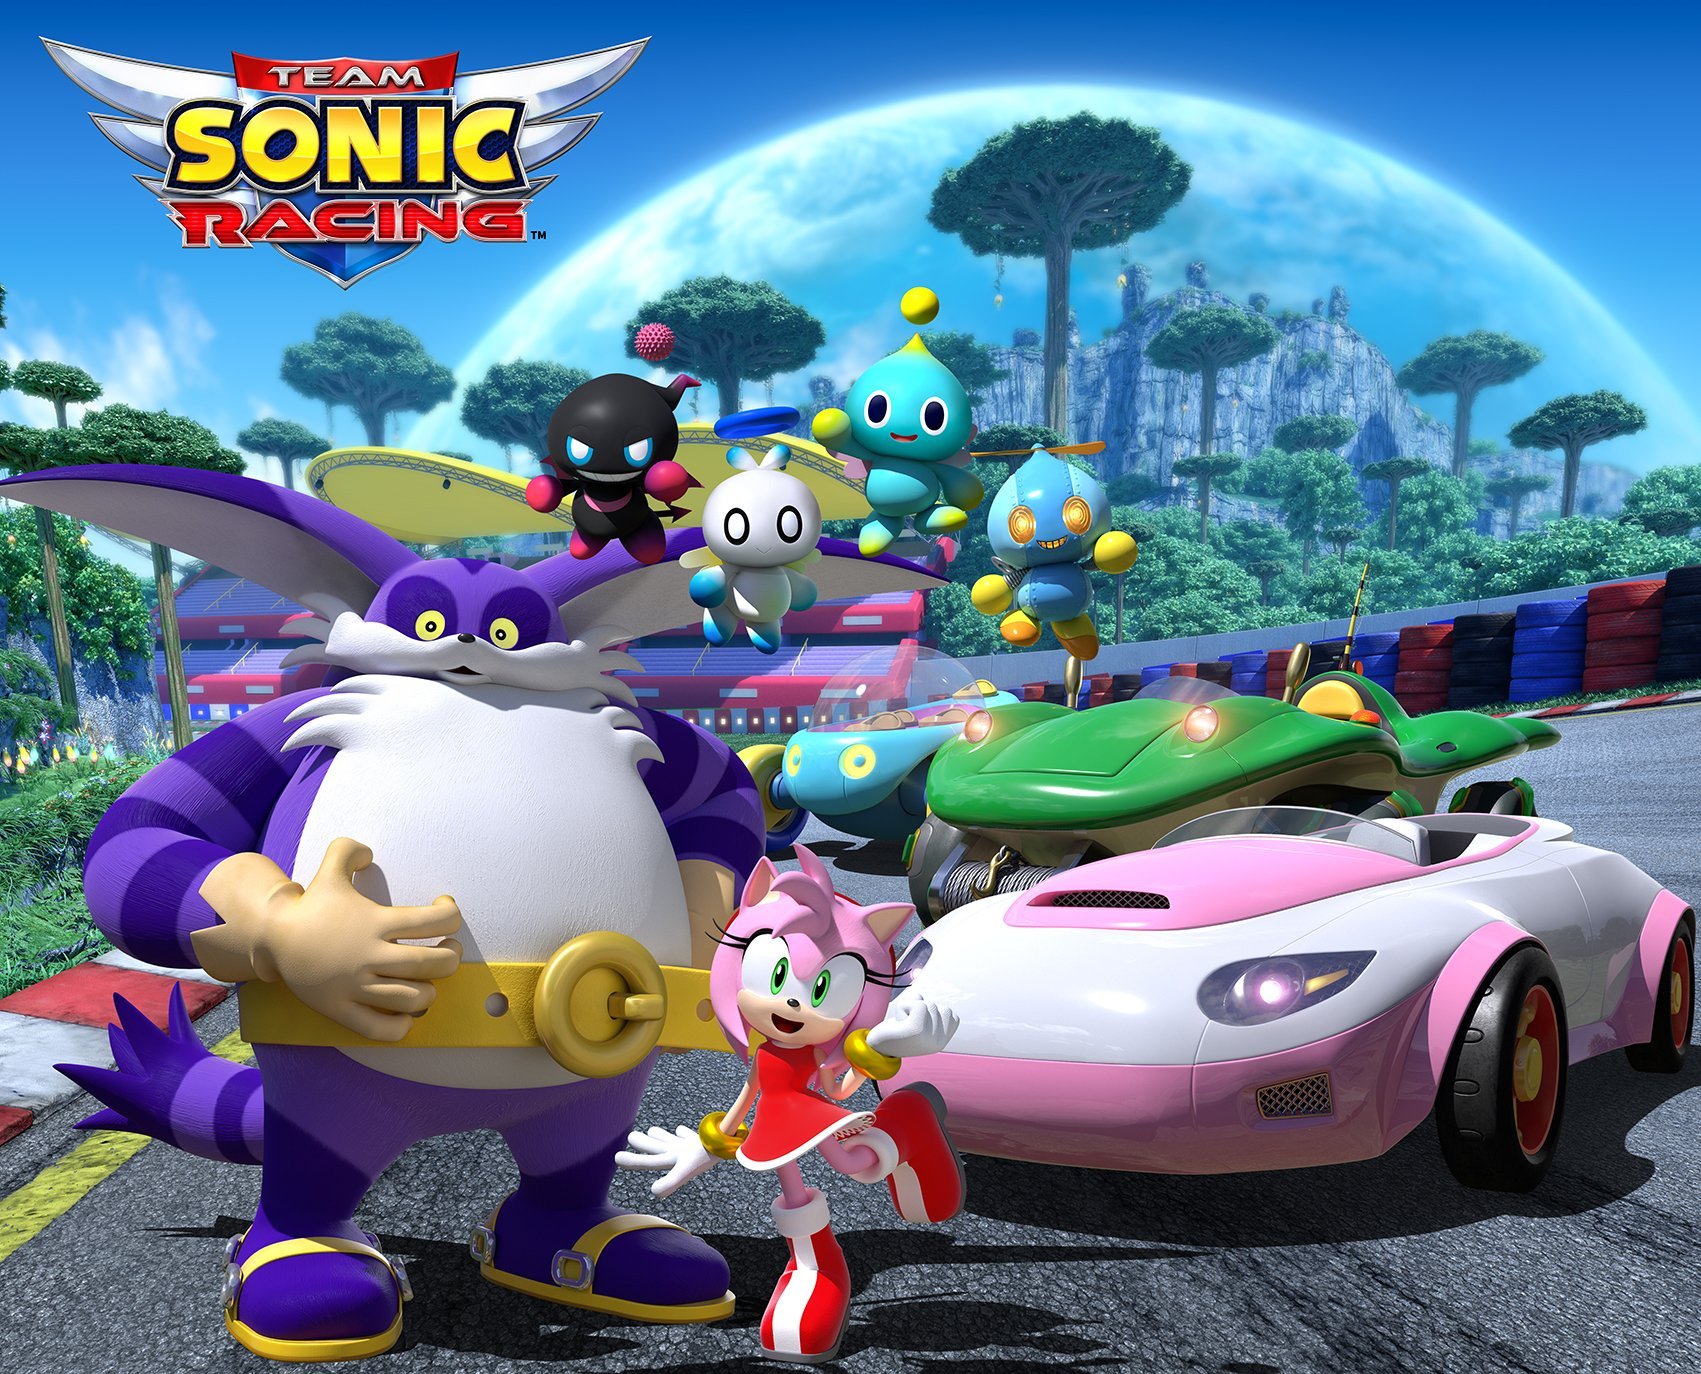 Sonic the Hedgehog 4 - Episode 2 PSN - Download game PS3